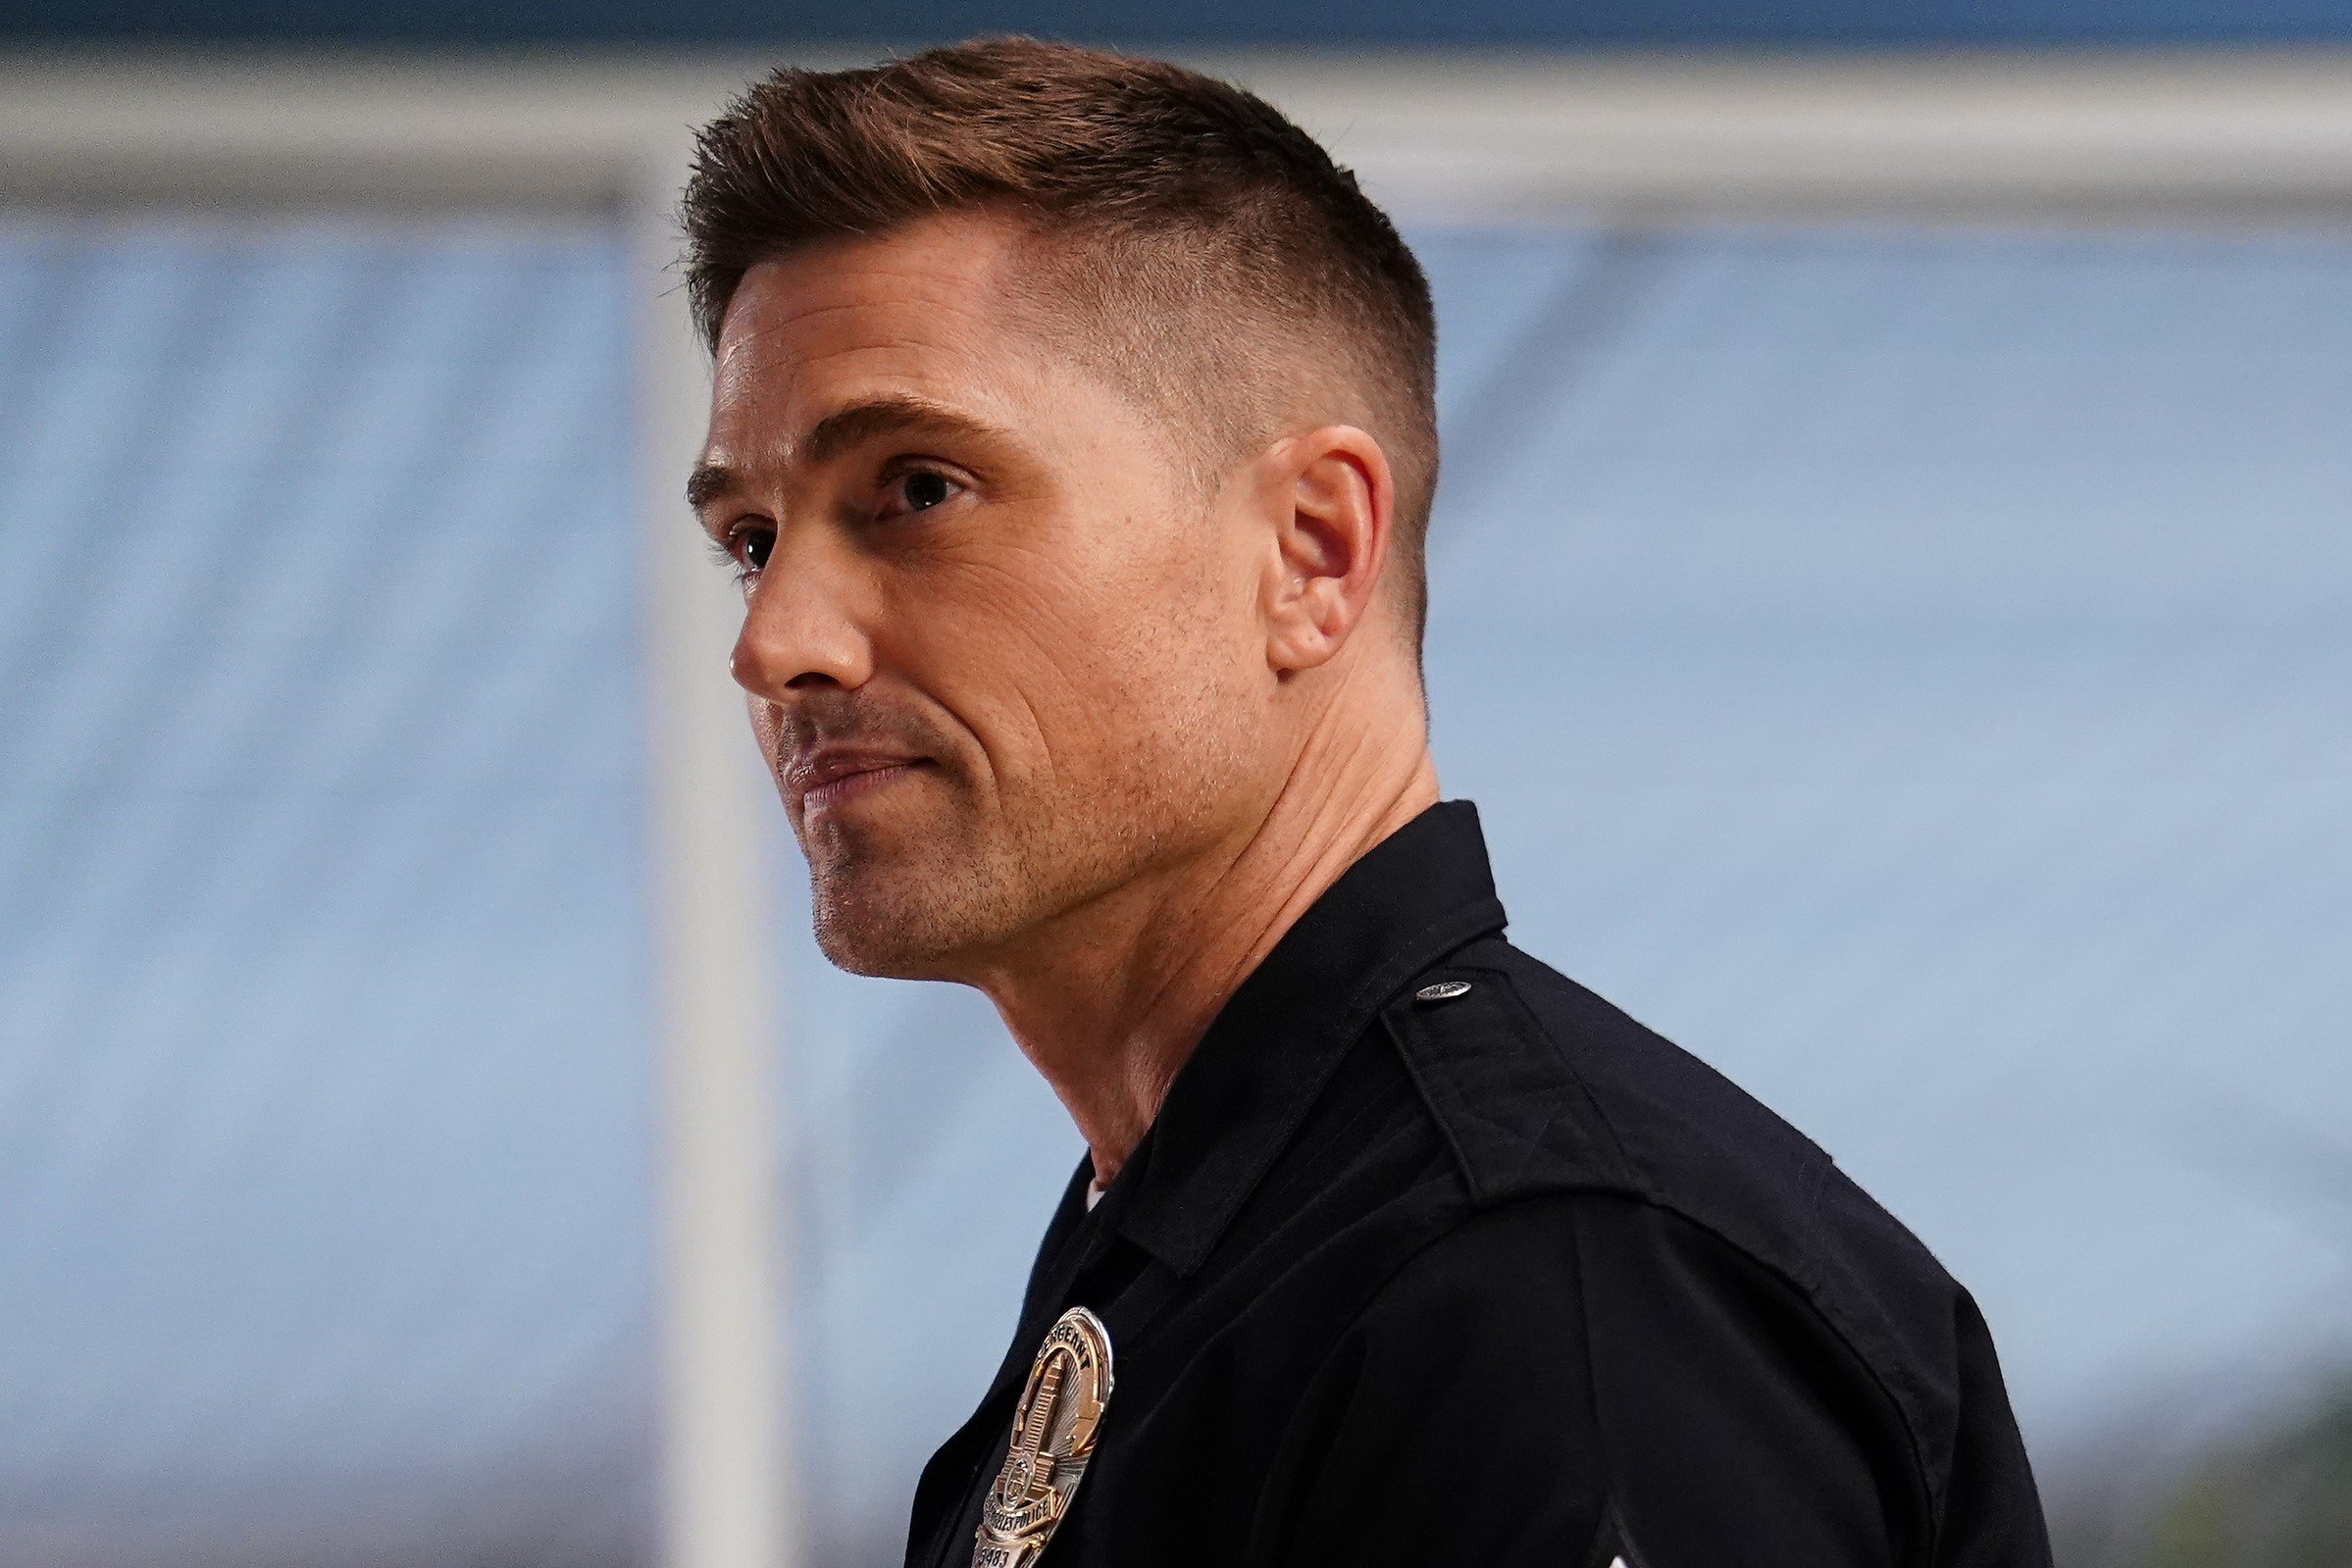 Eric Winter, in character as Tim Bradford in 'The Rookie' Season 5 Episode 13, wears his black police uniform.